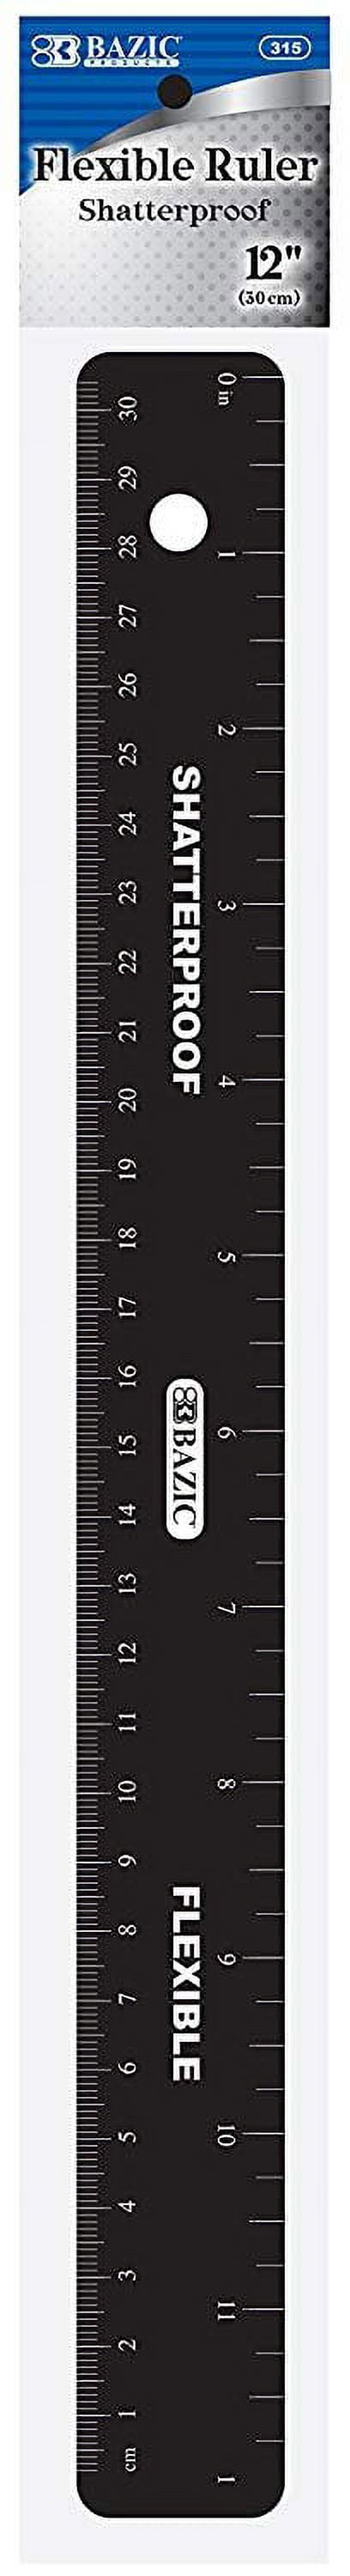 Flexible Ruler - Supreme Court, Assorted – Supreme Court Gifts